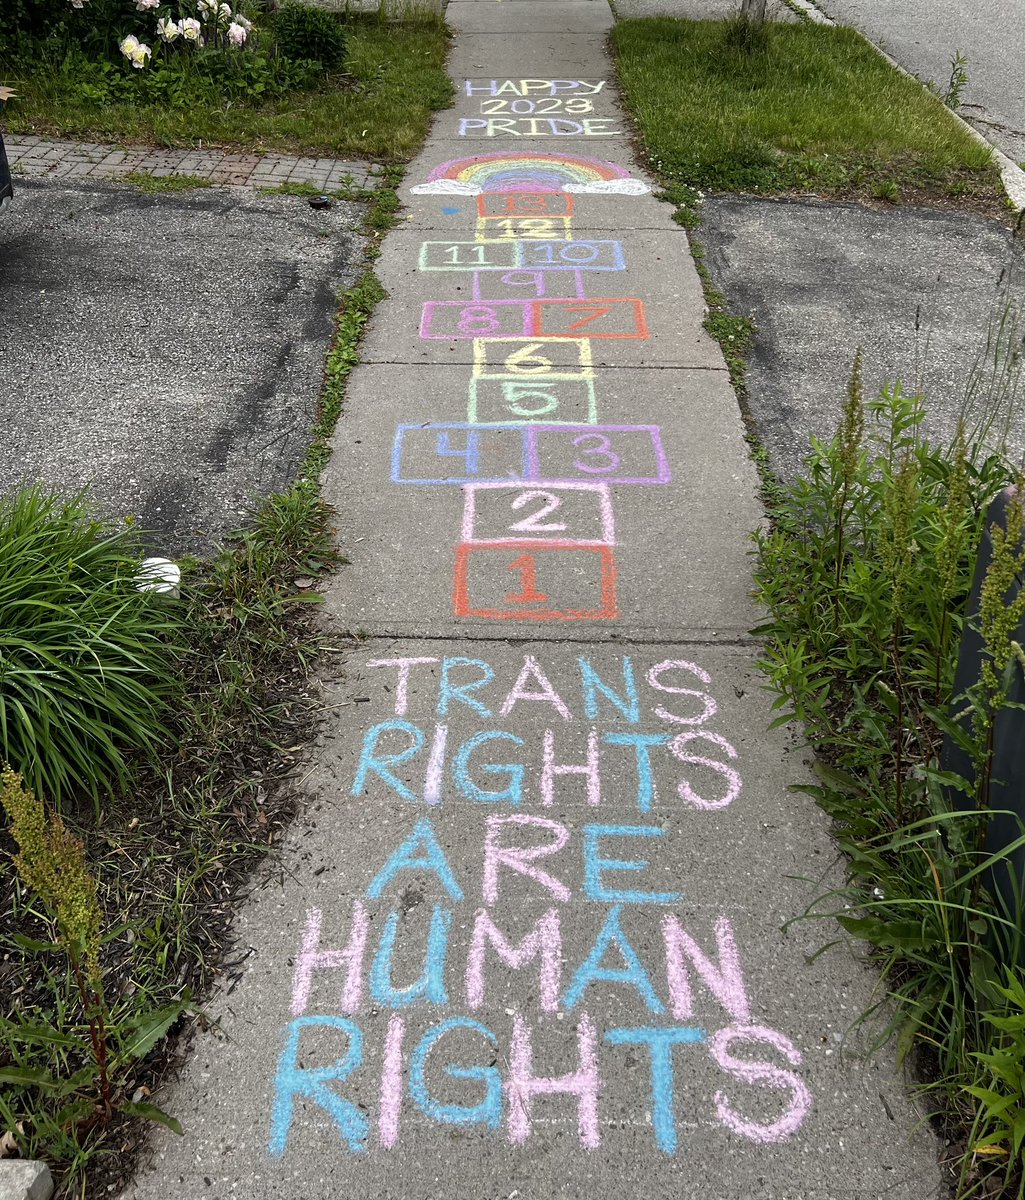 The much needed rain washed away my previous #Pride2023 message, so today was time for some new chalk!

Hopscotch for Pride! 🏳️‍🌈🏳️‍⚧️
#TransRightsAreHumanRights #onpoli